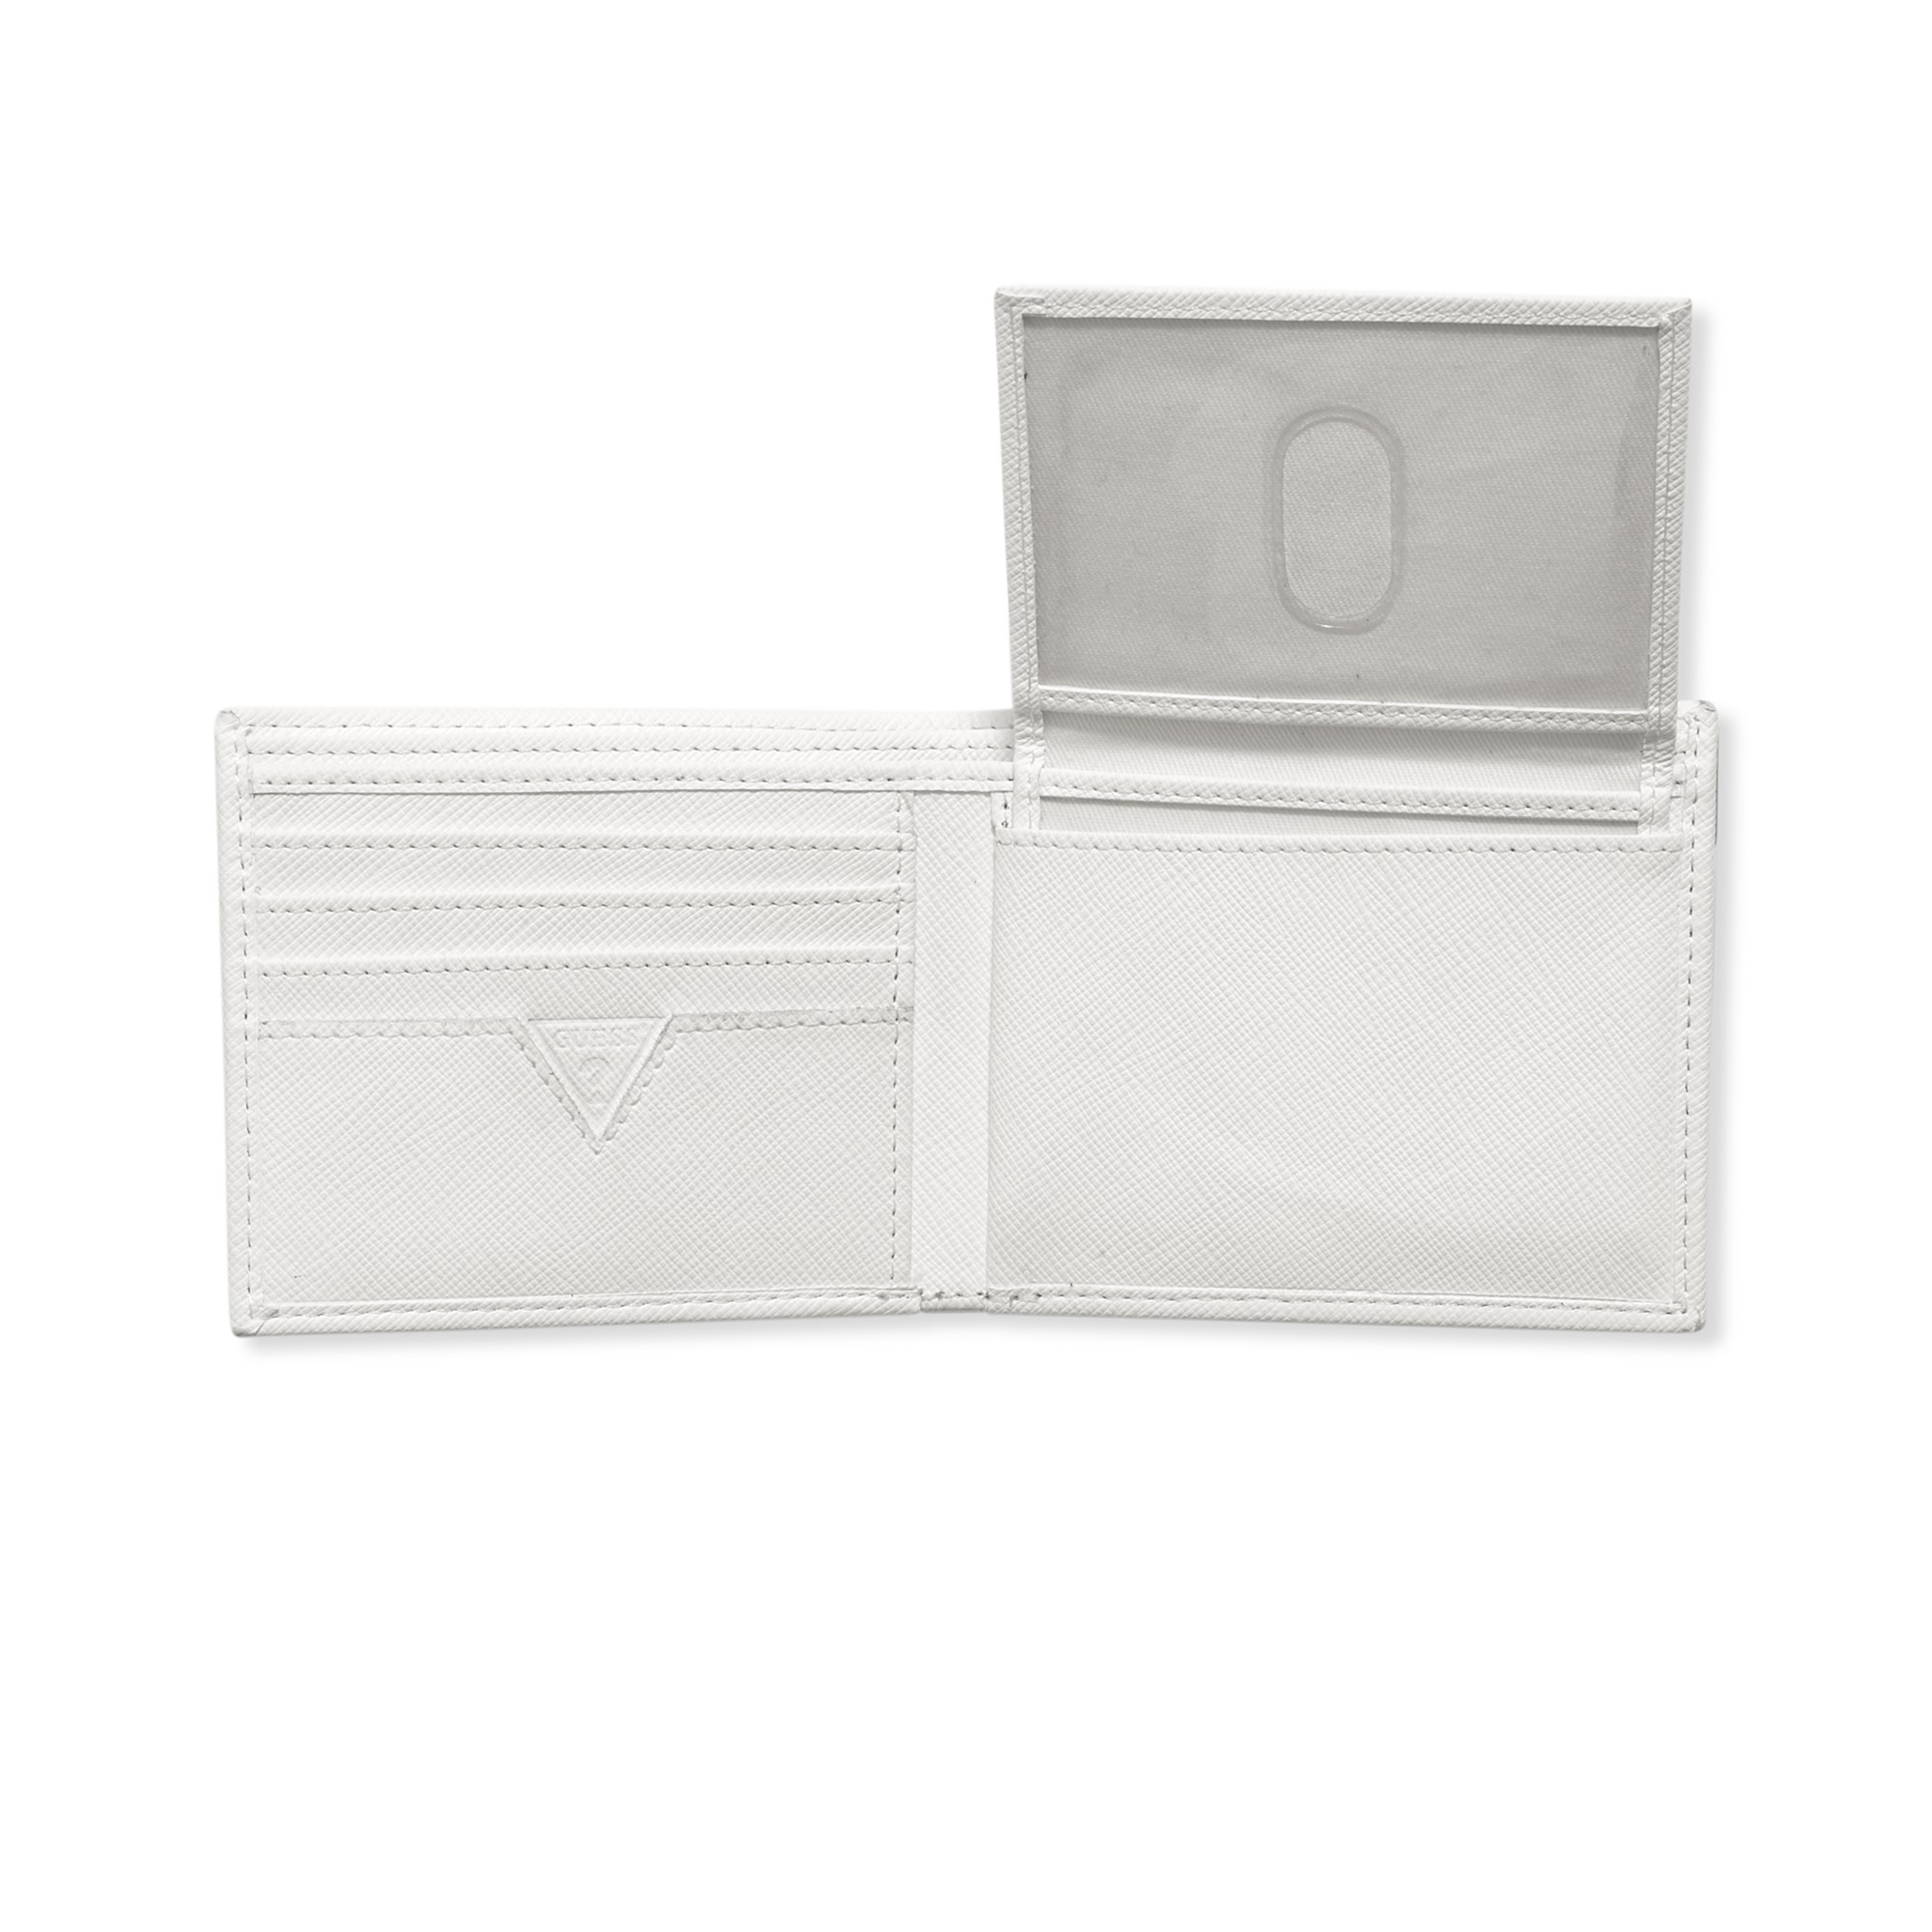 Guess Wallets Sarasota Passcase Wallet in White for Men